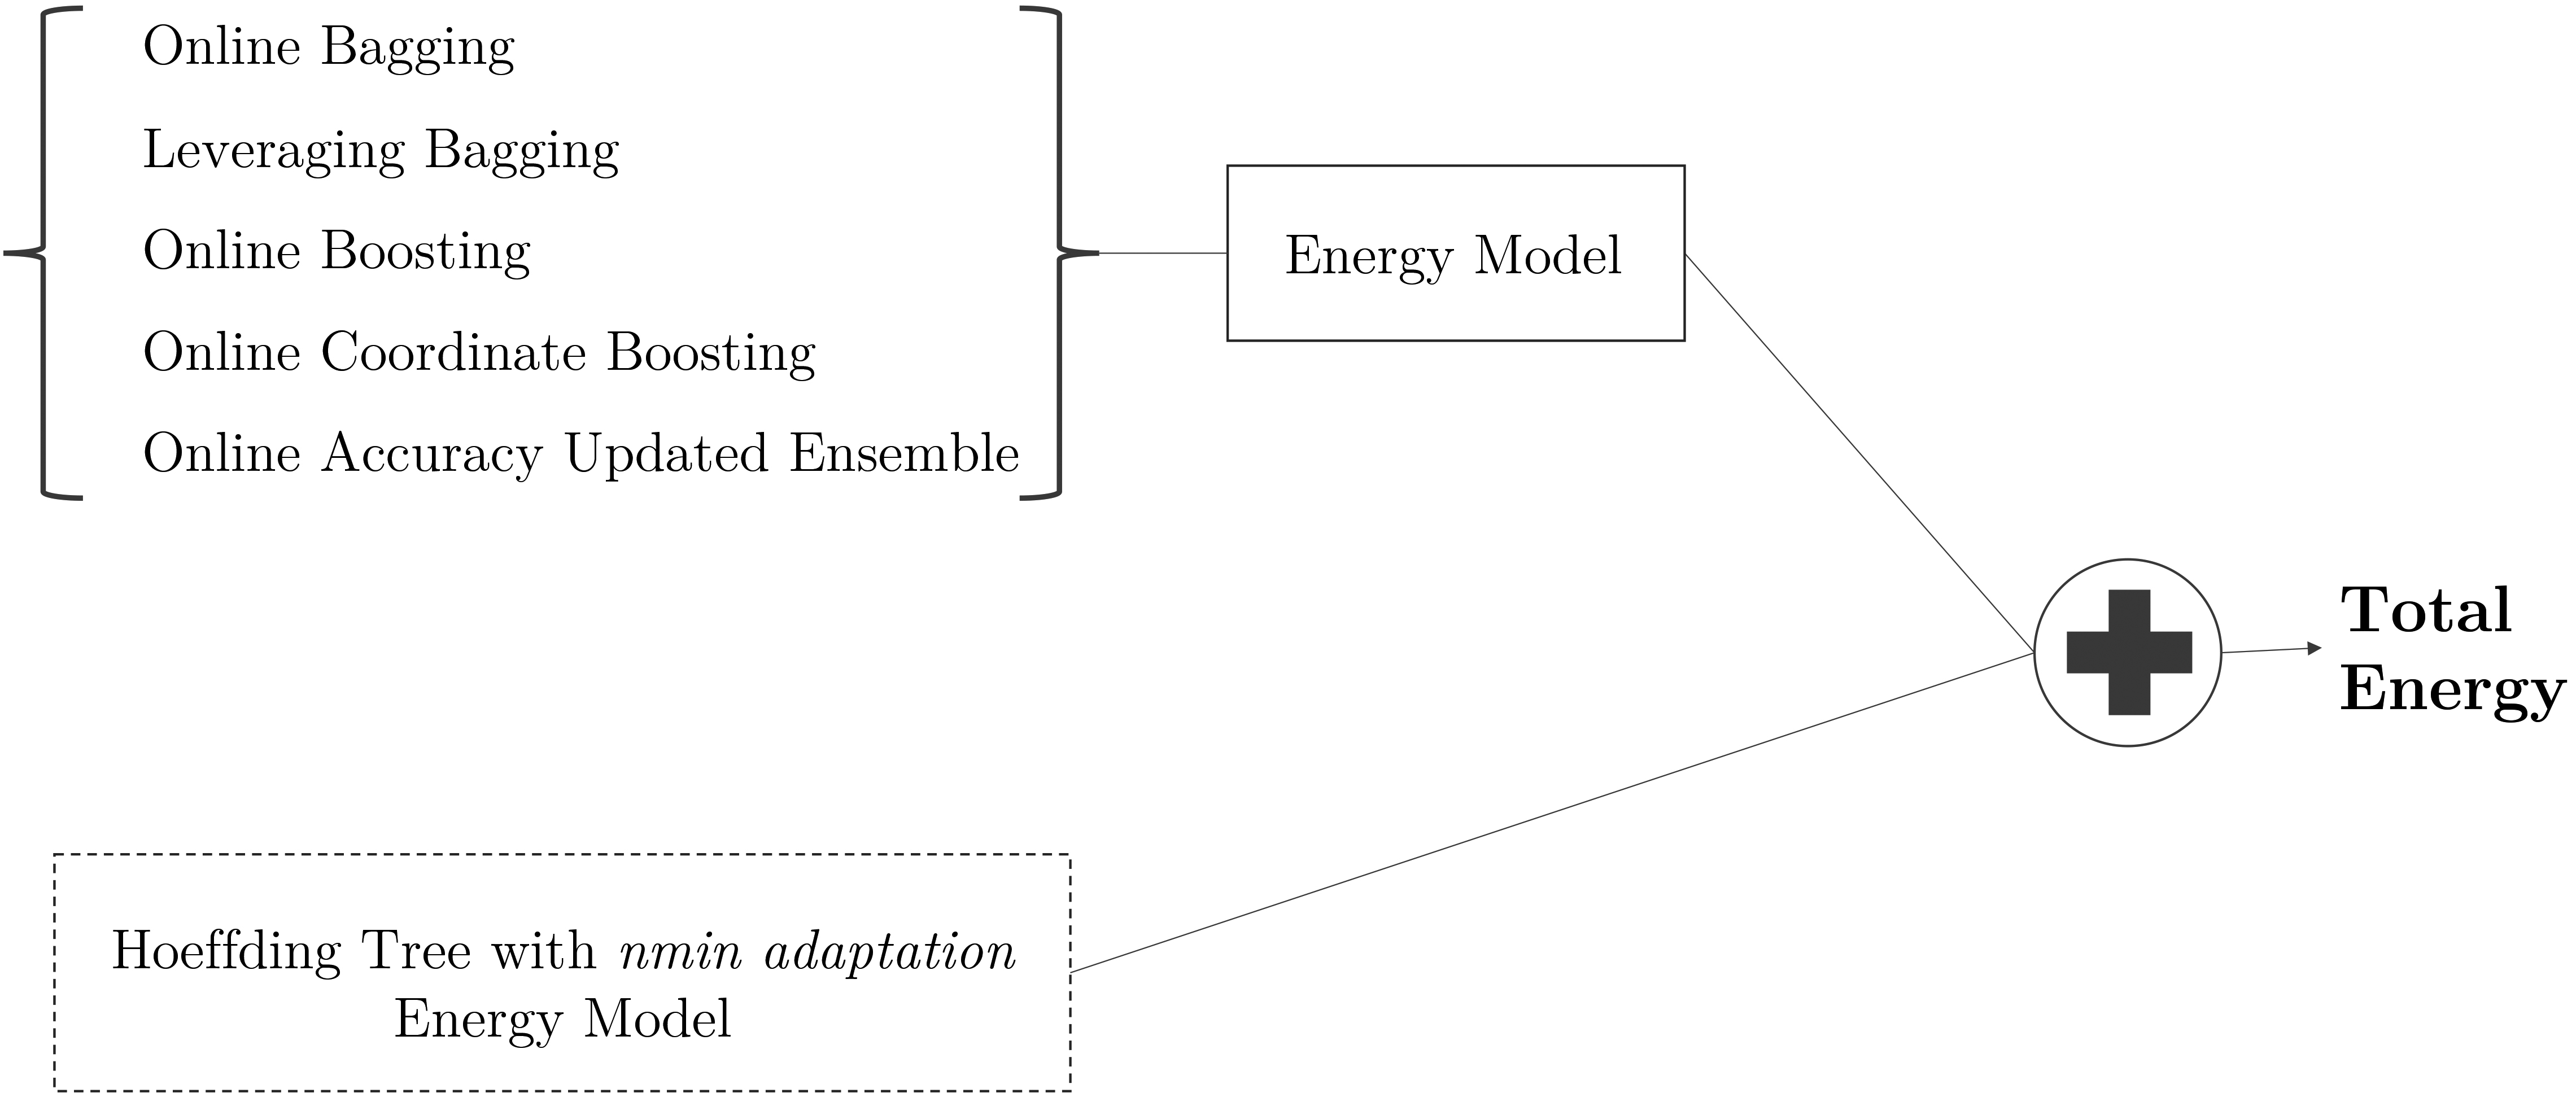 Energy model approach for ensembles of Hoeffding trees with nmin adaptation. Steps: i) Obtain the energy model (following Fig. 2) for the general ensemble of trees; ii) Obtain the energy model of Hoeffding trees with nmin adaptation; iii) Sum the energy model variables. The energy model for Hoeffding trees (dashed box) can be substituted by the energy model of any other algorithm that is going to be part of the ensembles (for example Hoeffding Adaptive Trees [4]).